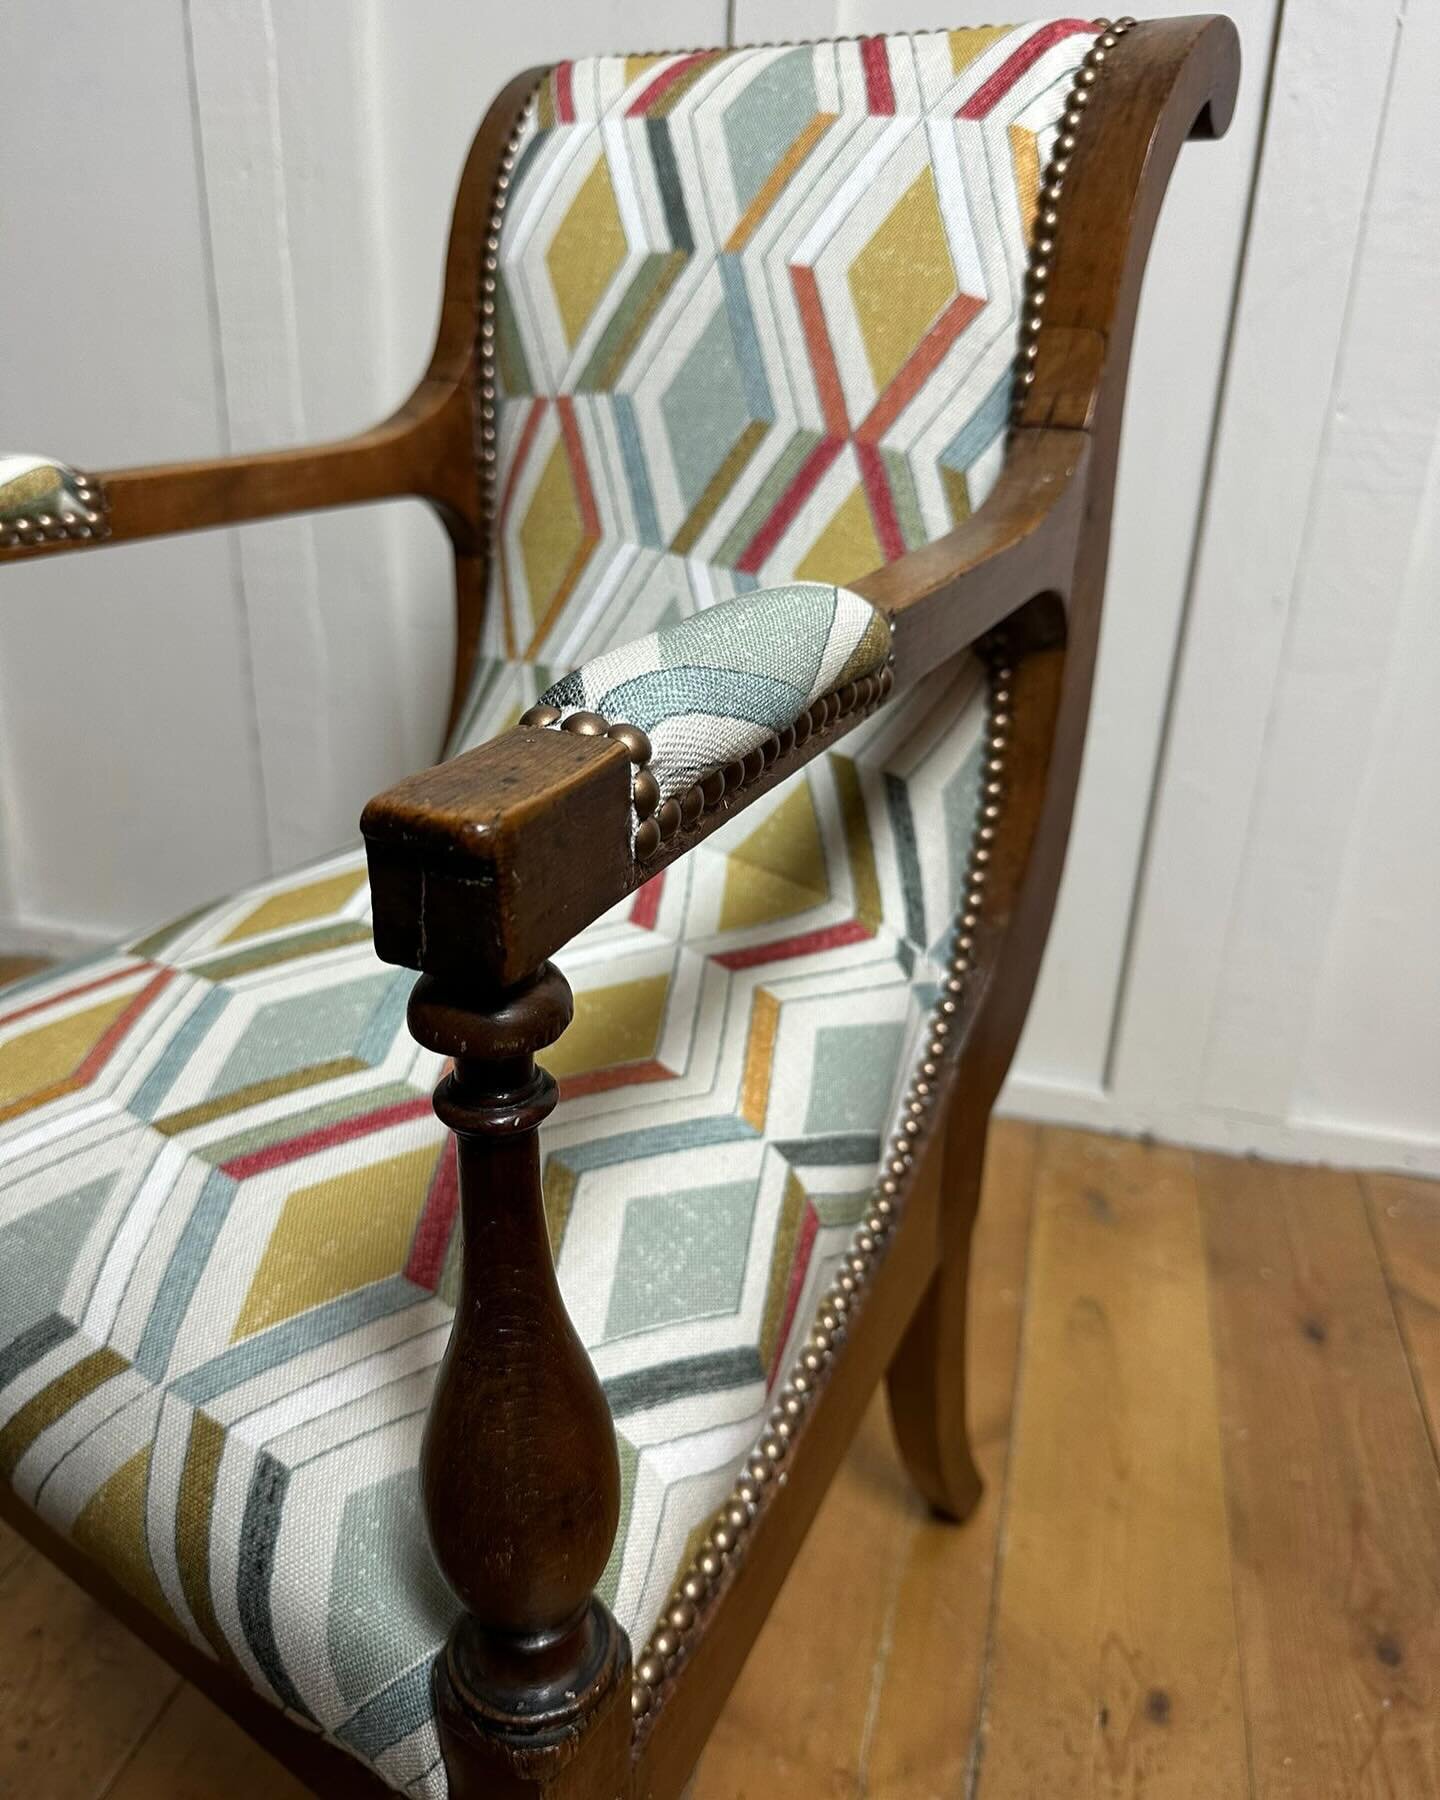 A duo of antique chairs revived for their West London home. Both were reupholstered in a modern but classic print by @janechurchillfabrics. 
&bull;
&bull;
&bull; 
#upholstery #reupholstery #upholsterylondon #interiors #interior #interiordesign #inter